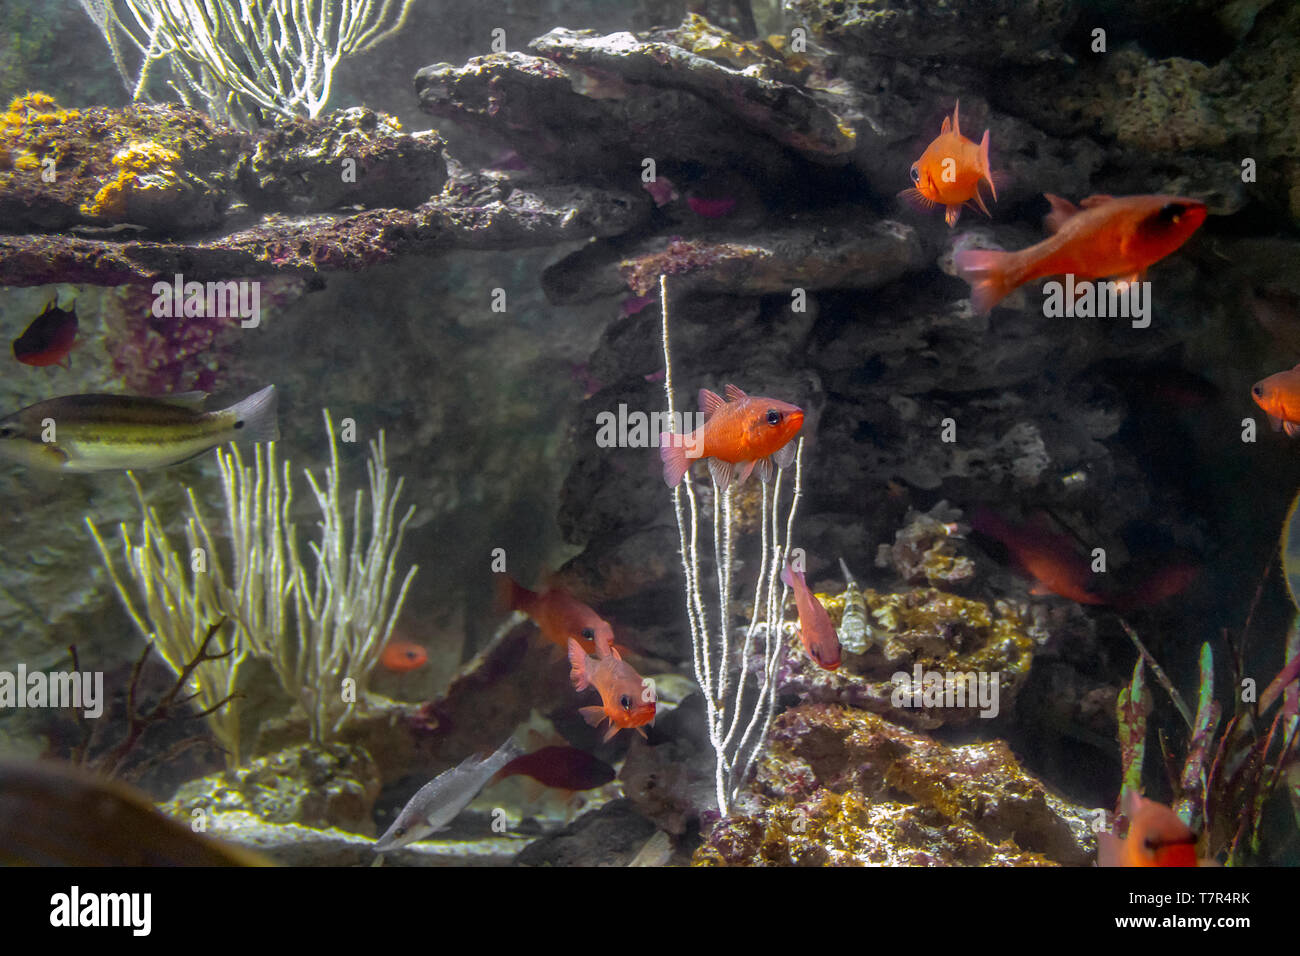 aquatic scenery showing red reef fishes Stock Photo